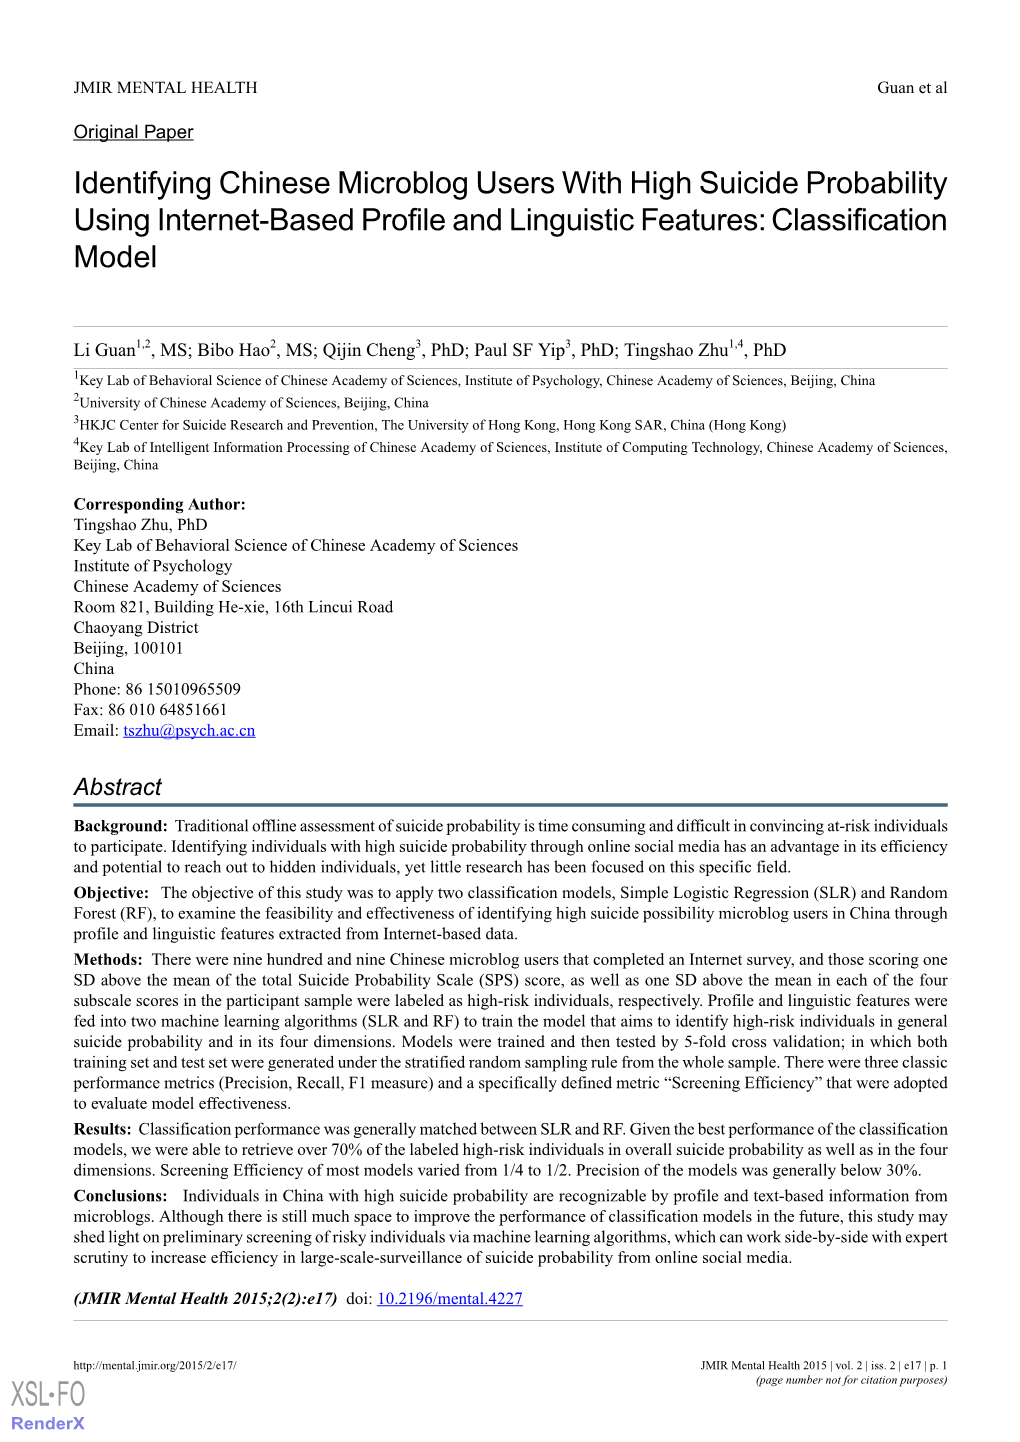 Identifying Chinese Microblog Users with High Suicide Probability Using Internet-Based Profile and Linguistic Features: Classification Model